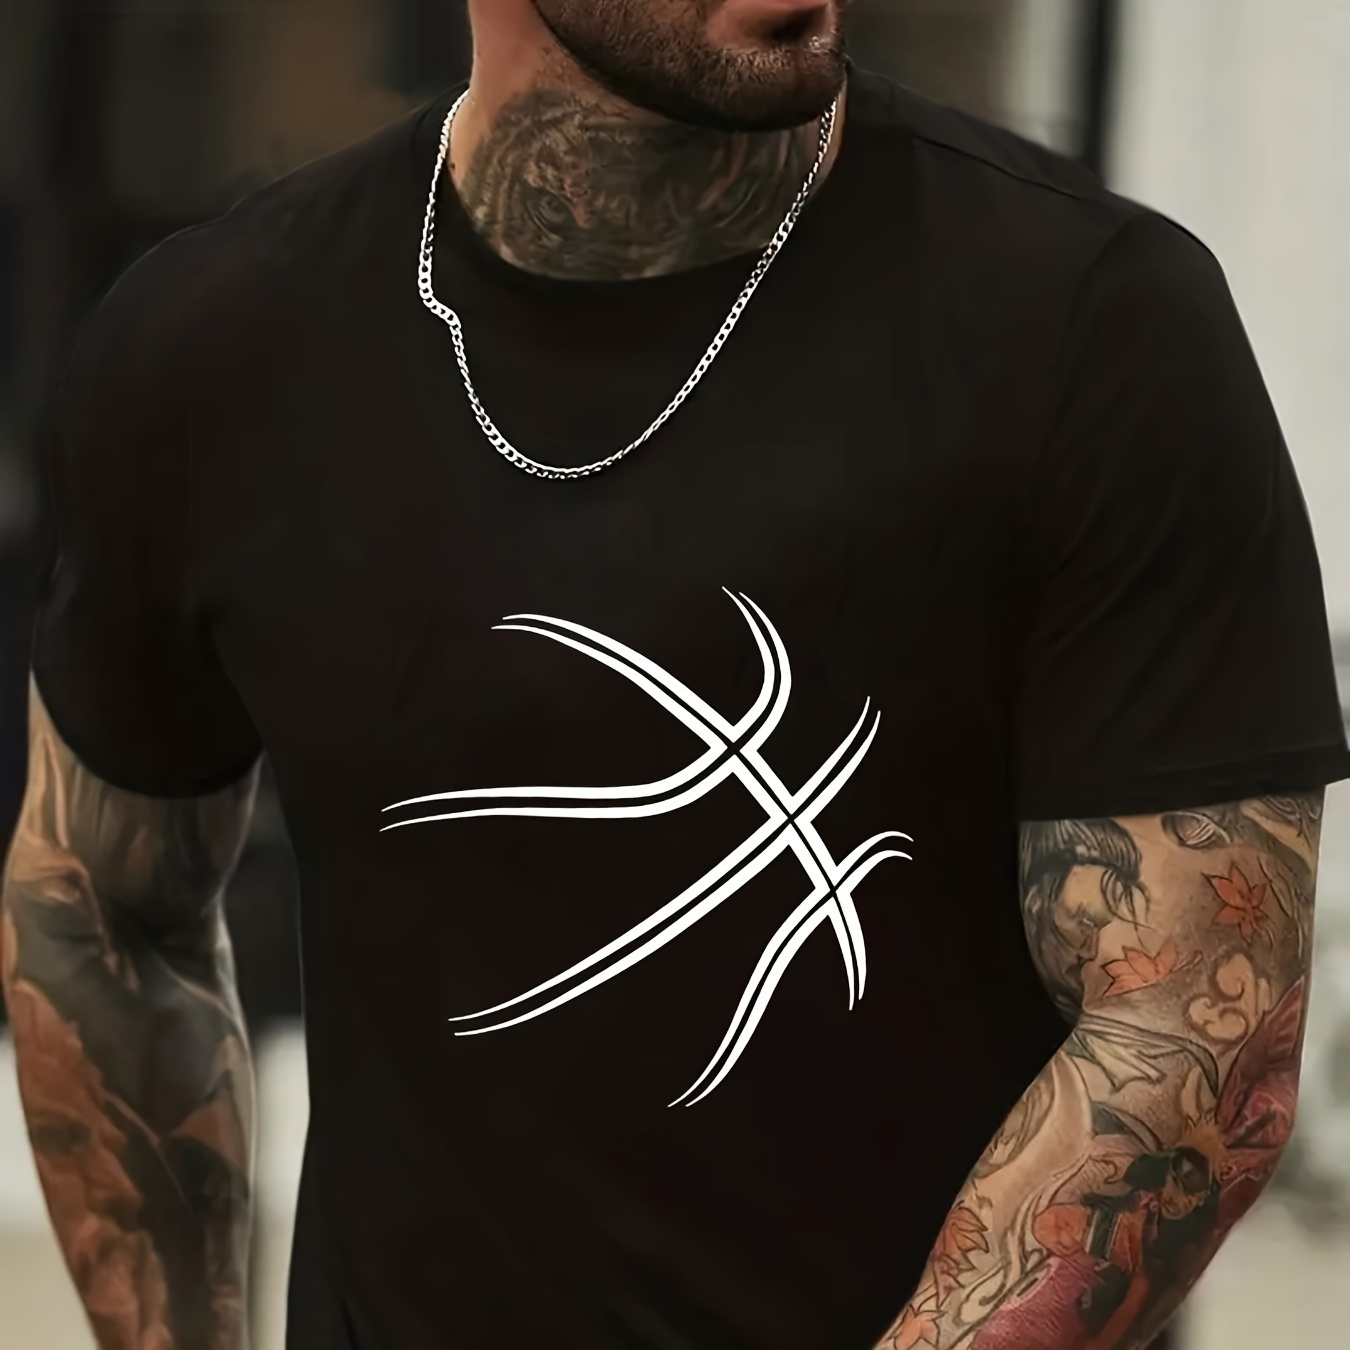 

1 Pc, 100% Cotton T-shirt, Stylish Mens Basketball-themed T-shirt - Soft, Breathable Fabric - Perfect For Casual Wear & Everyday Comfort